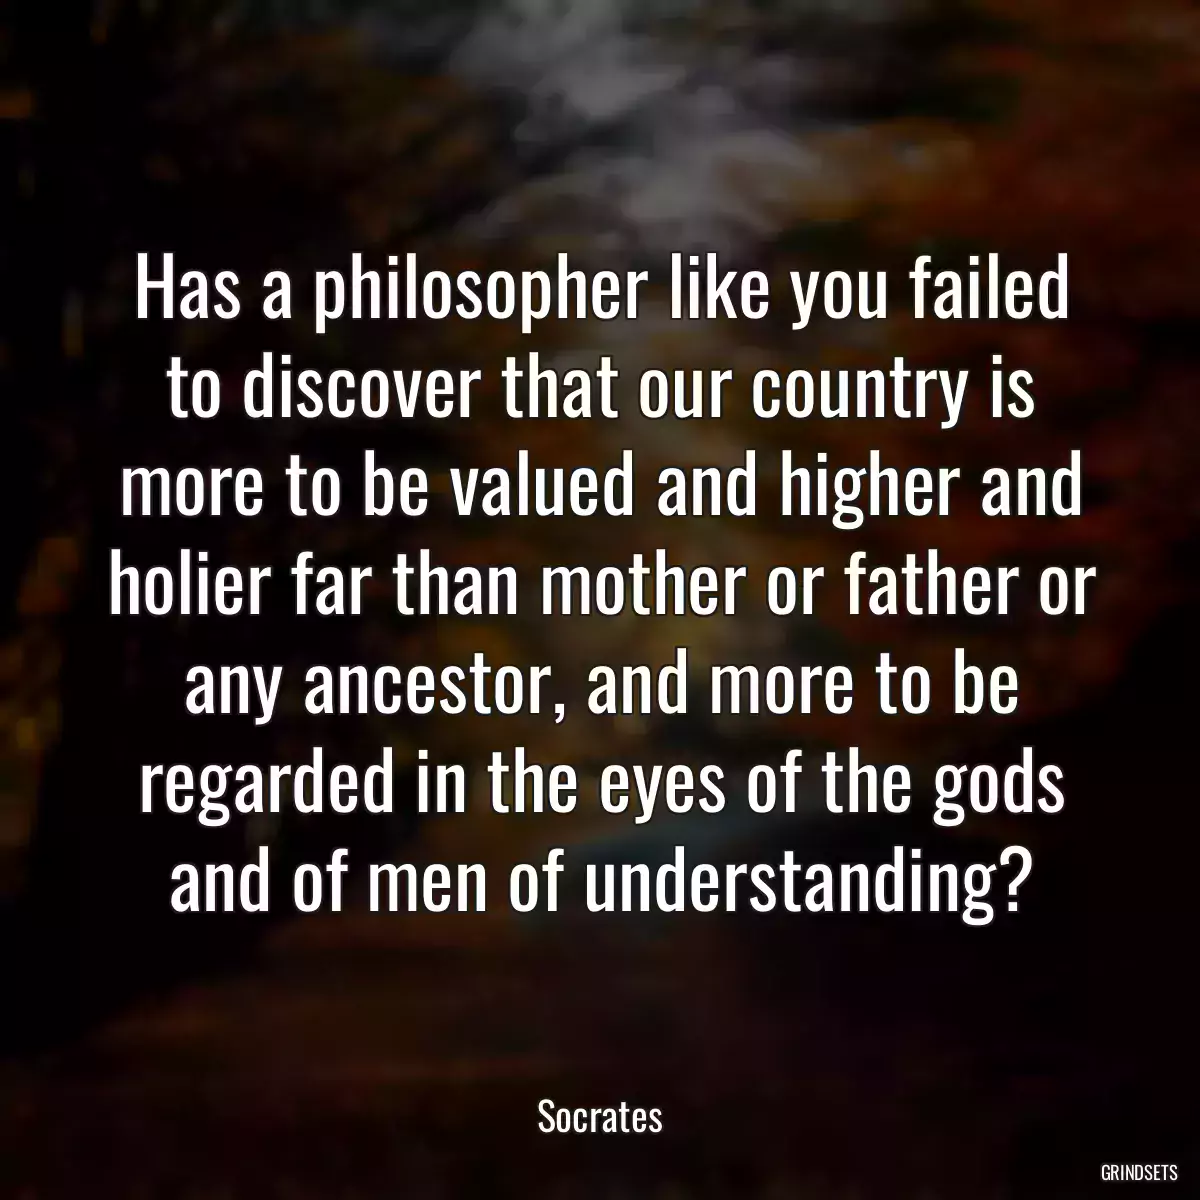 Has a philosopher like you failed to discover that our country is more to be valued and higher and holier far than mother or father or any ancestor, and more to be regarded in the eyes of the gods and of men of understanding?